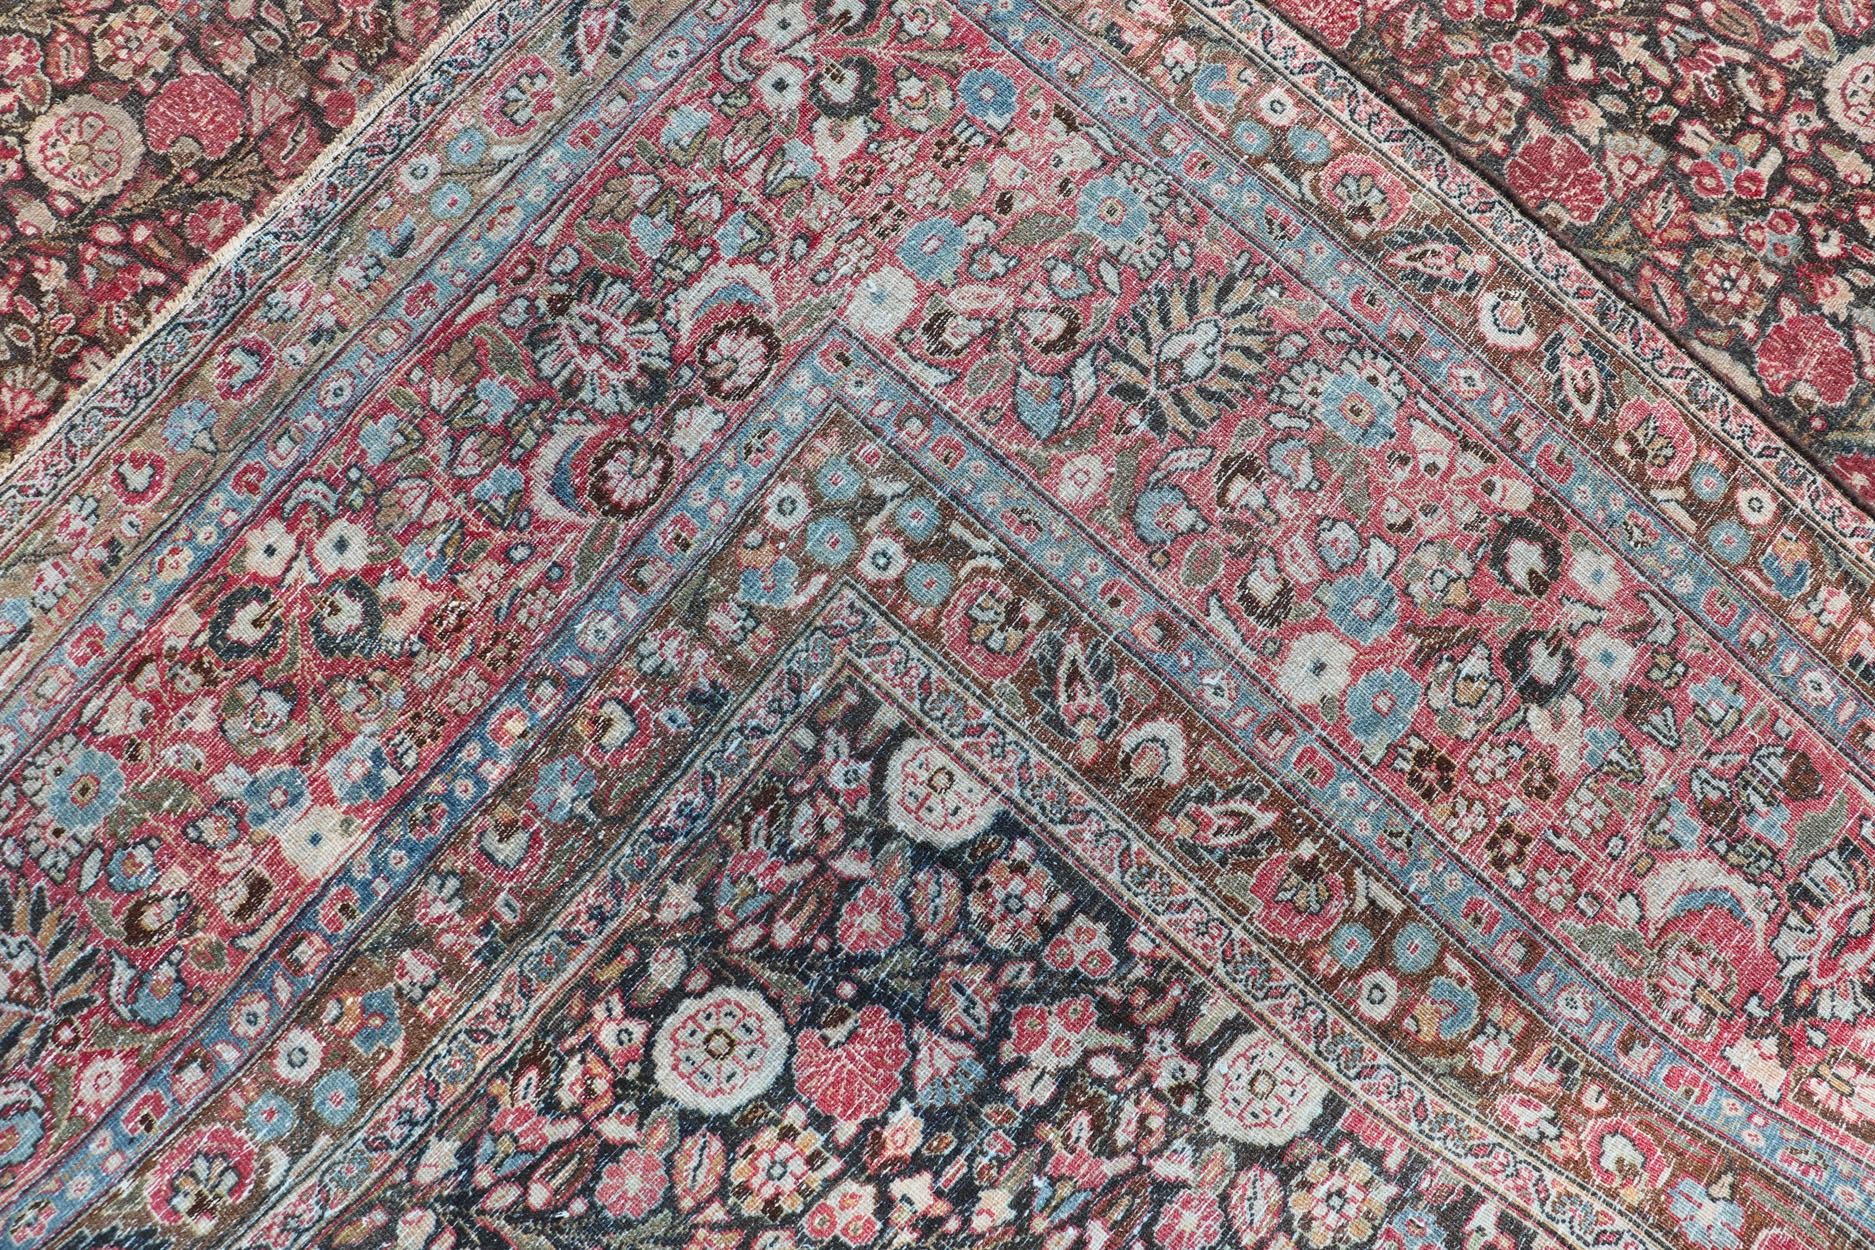 Antique Persian Khorasan Rug with Floral Design in Charcoal, Brown & Rose Red In Good Condition For Sale In Atlanta, GA